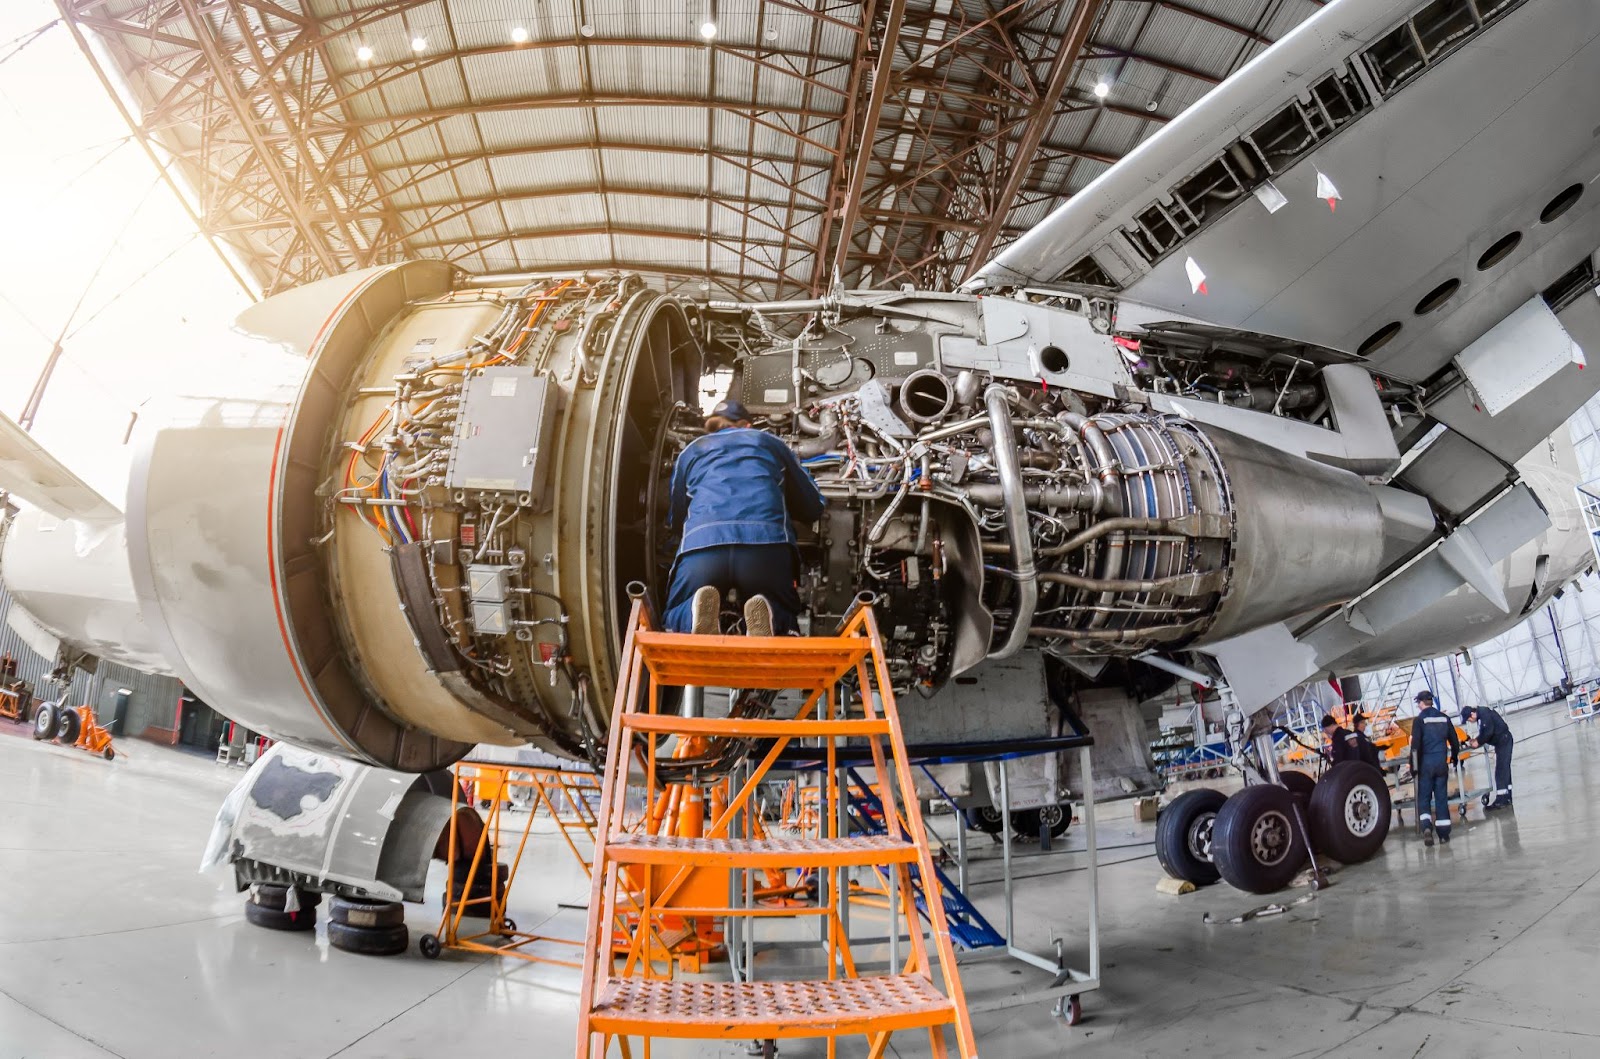 An airplane engine being worked on
